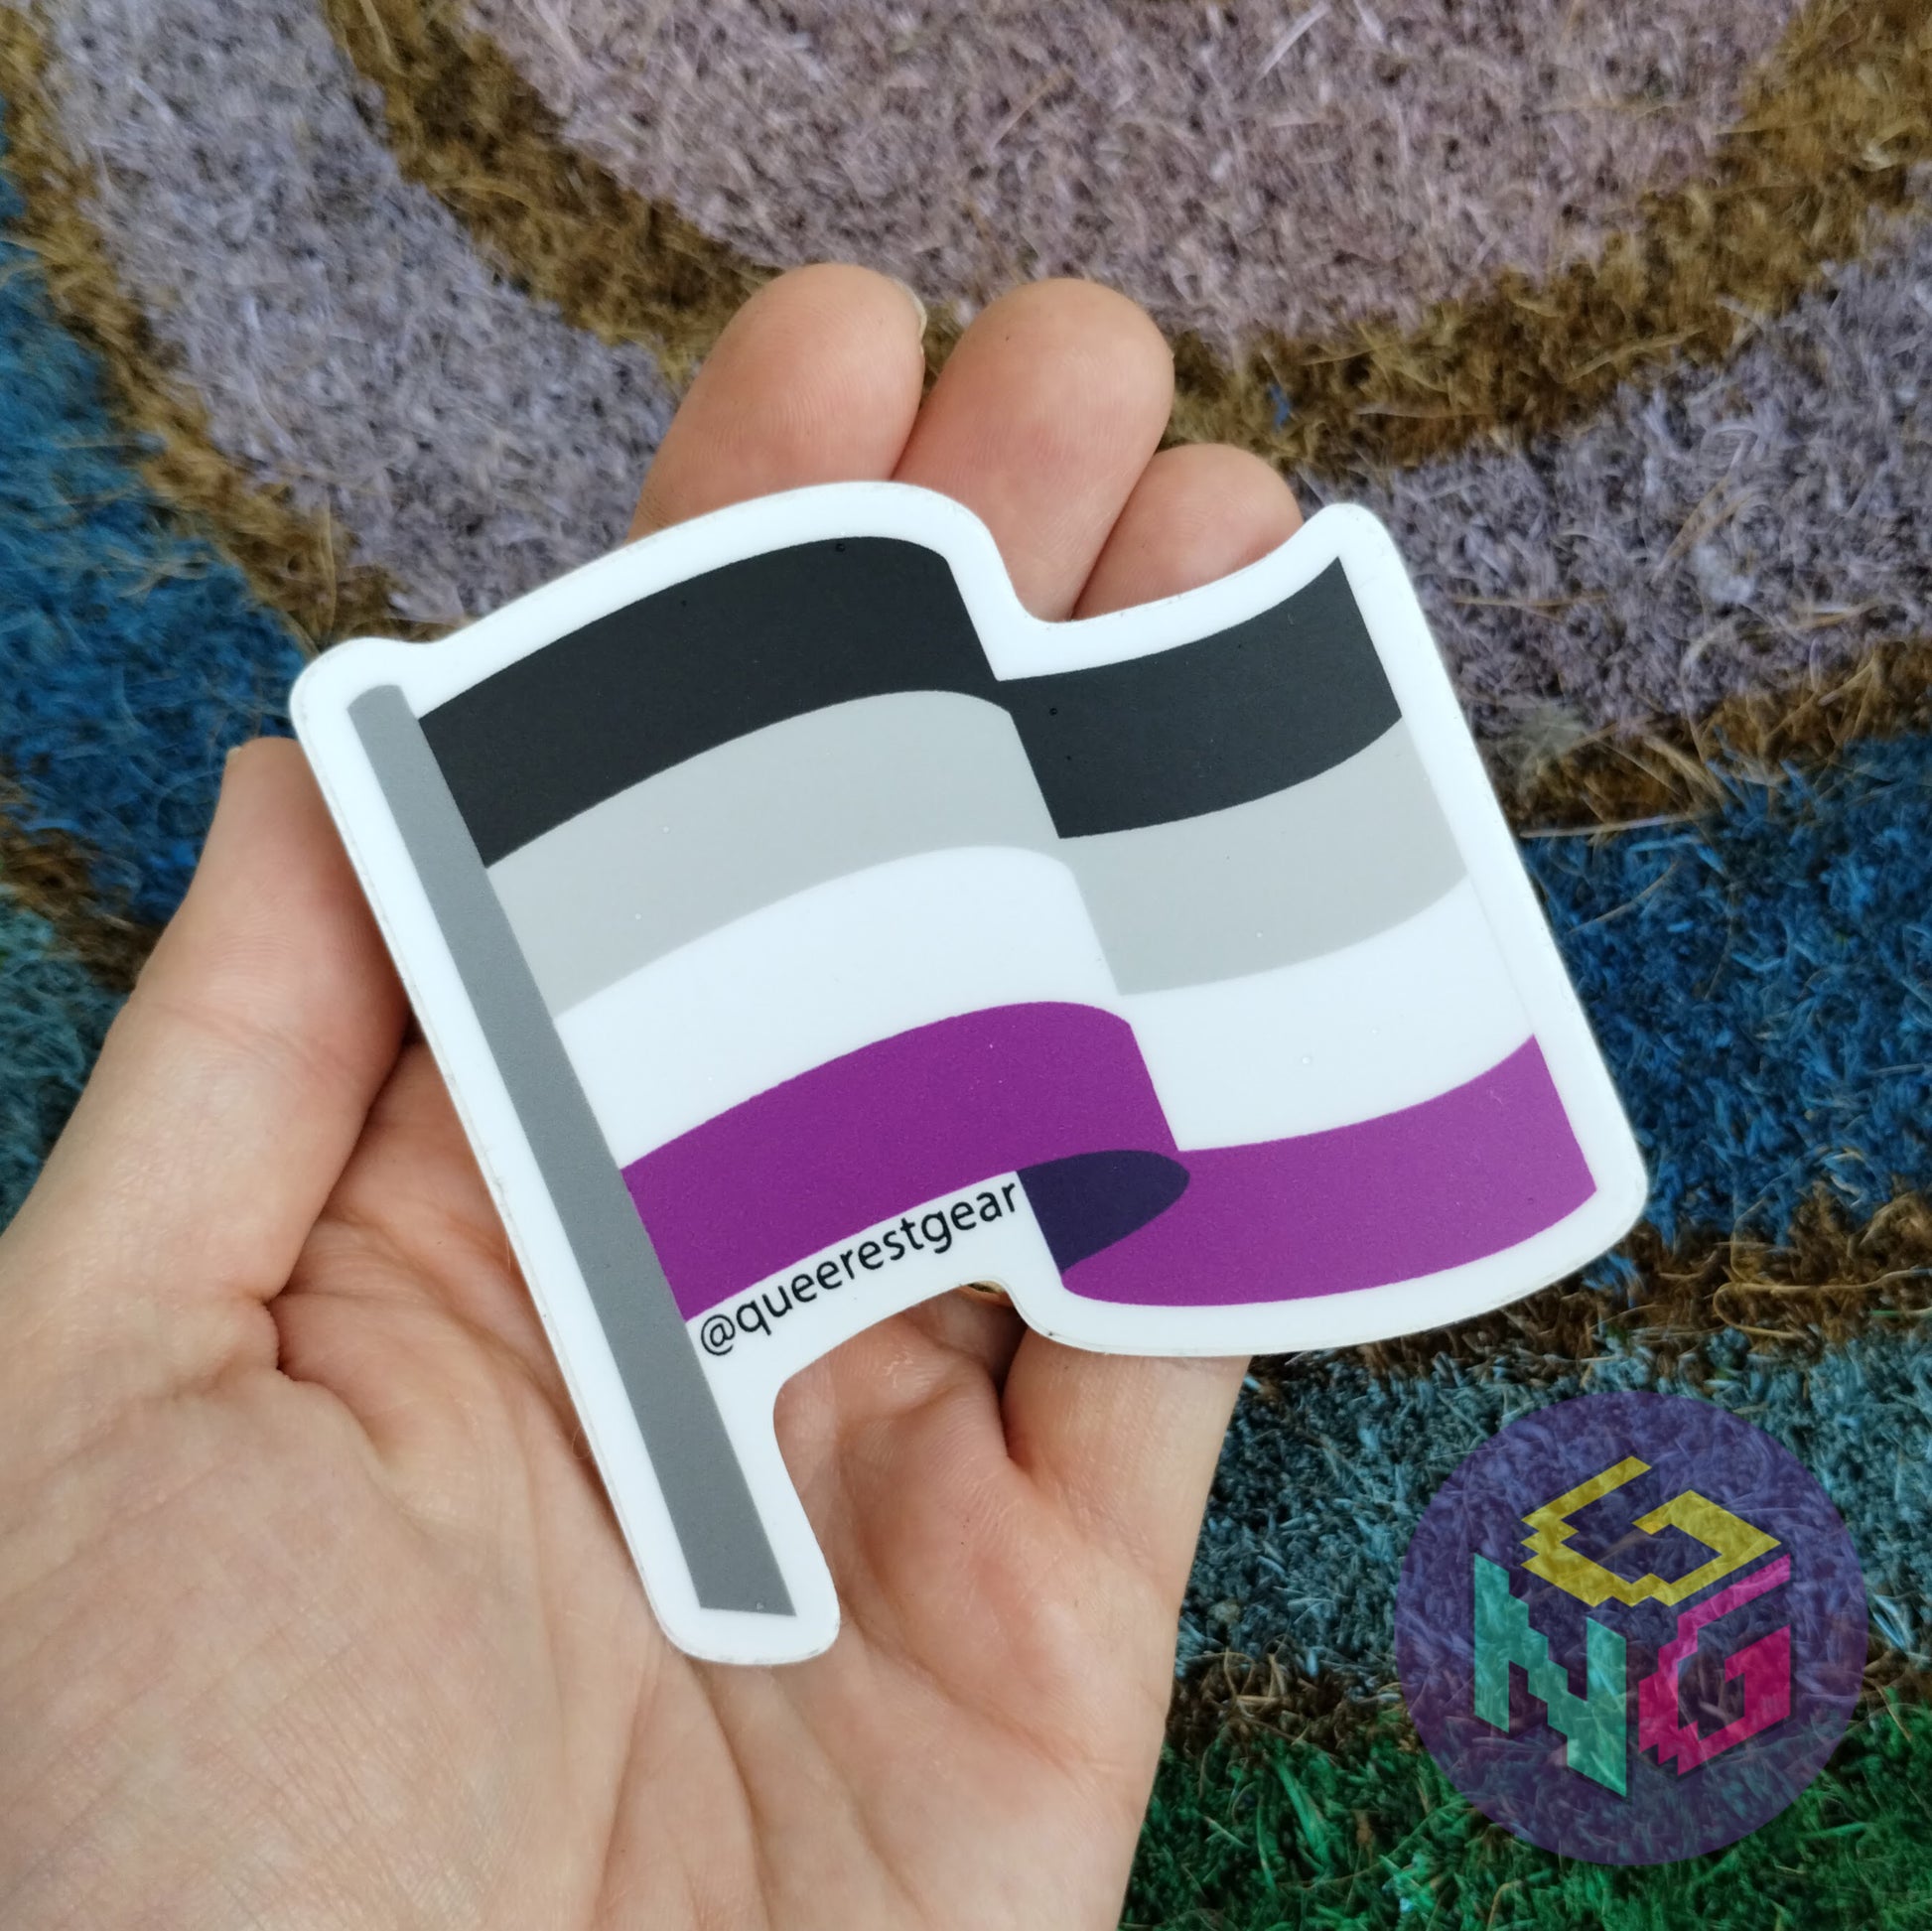 asexual flag sticker held in hand on a rainbow welcome mat